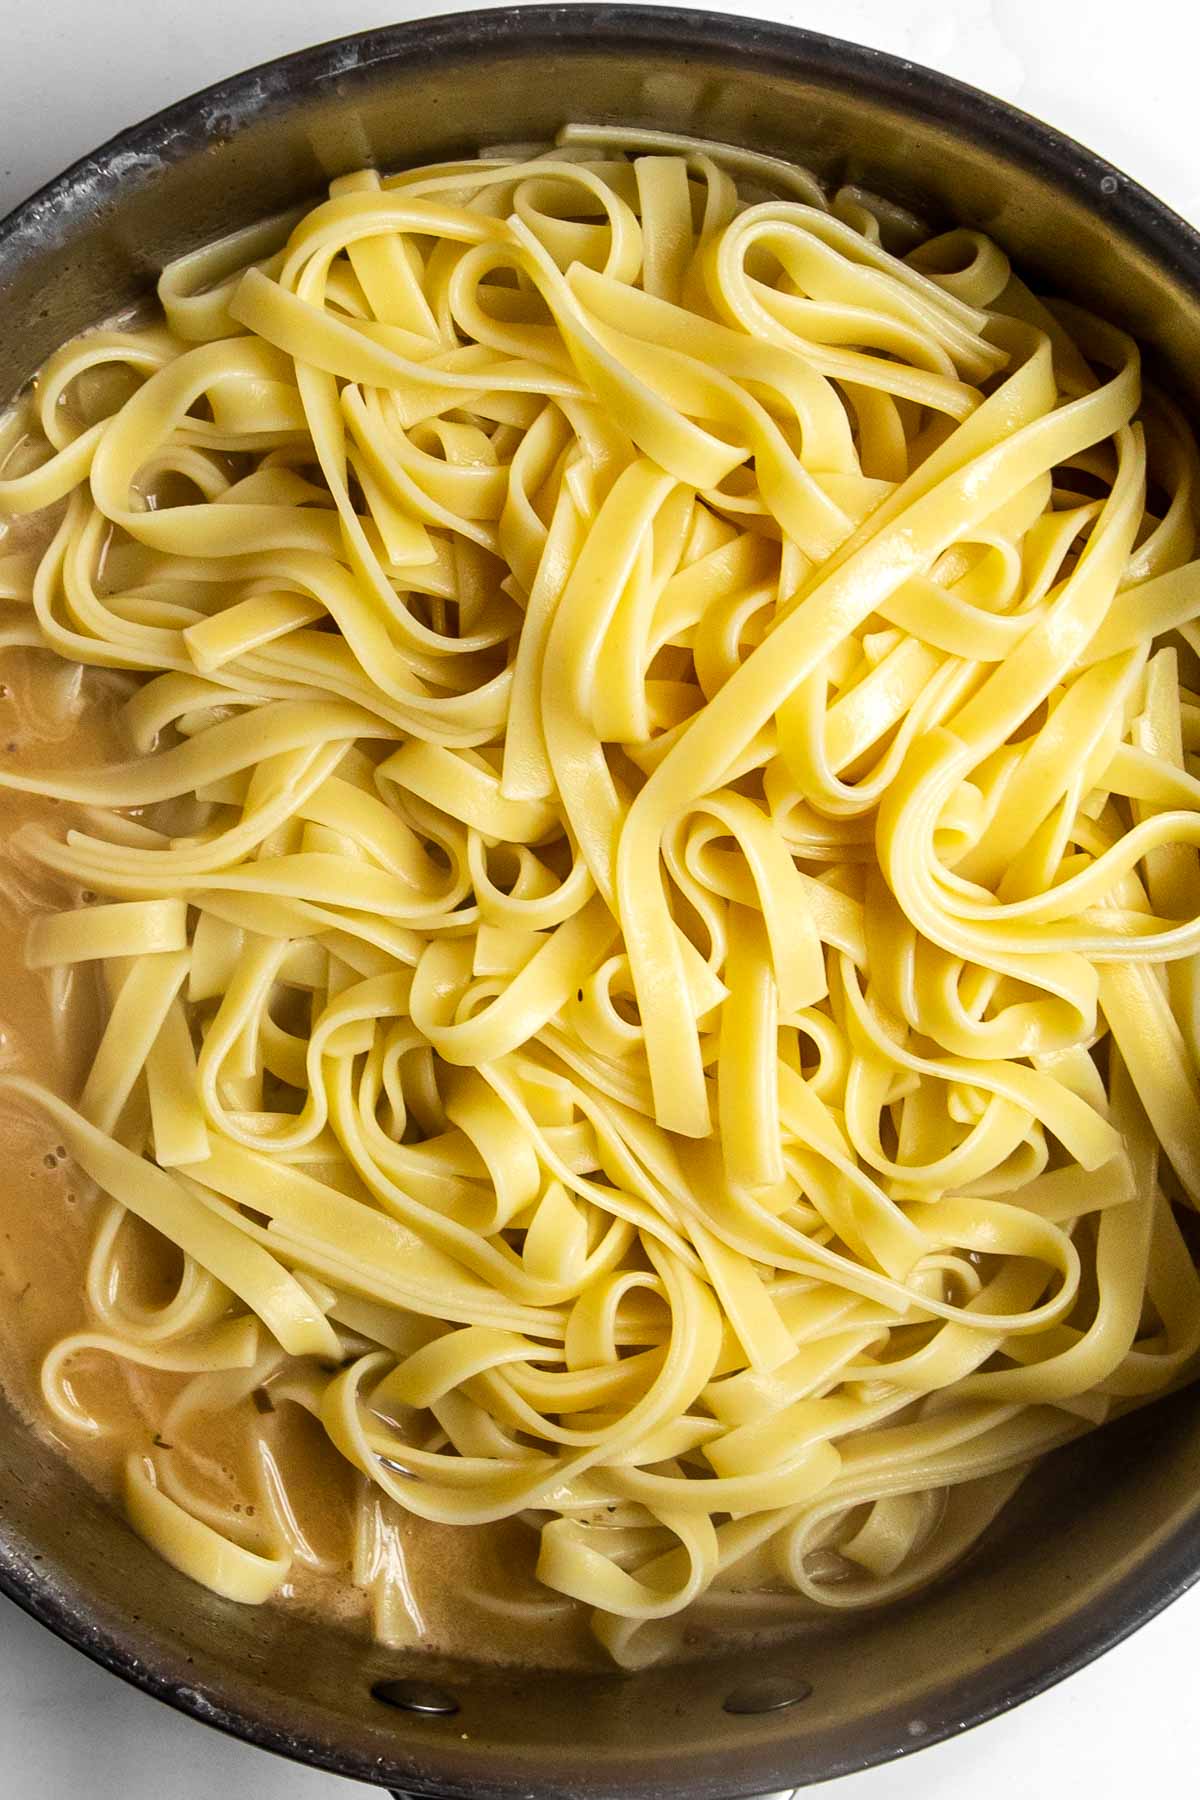 fettuccini noodles in a pan with emulsified butter and pasta water mixture.